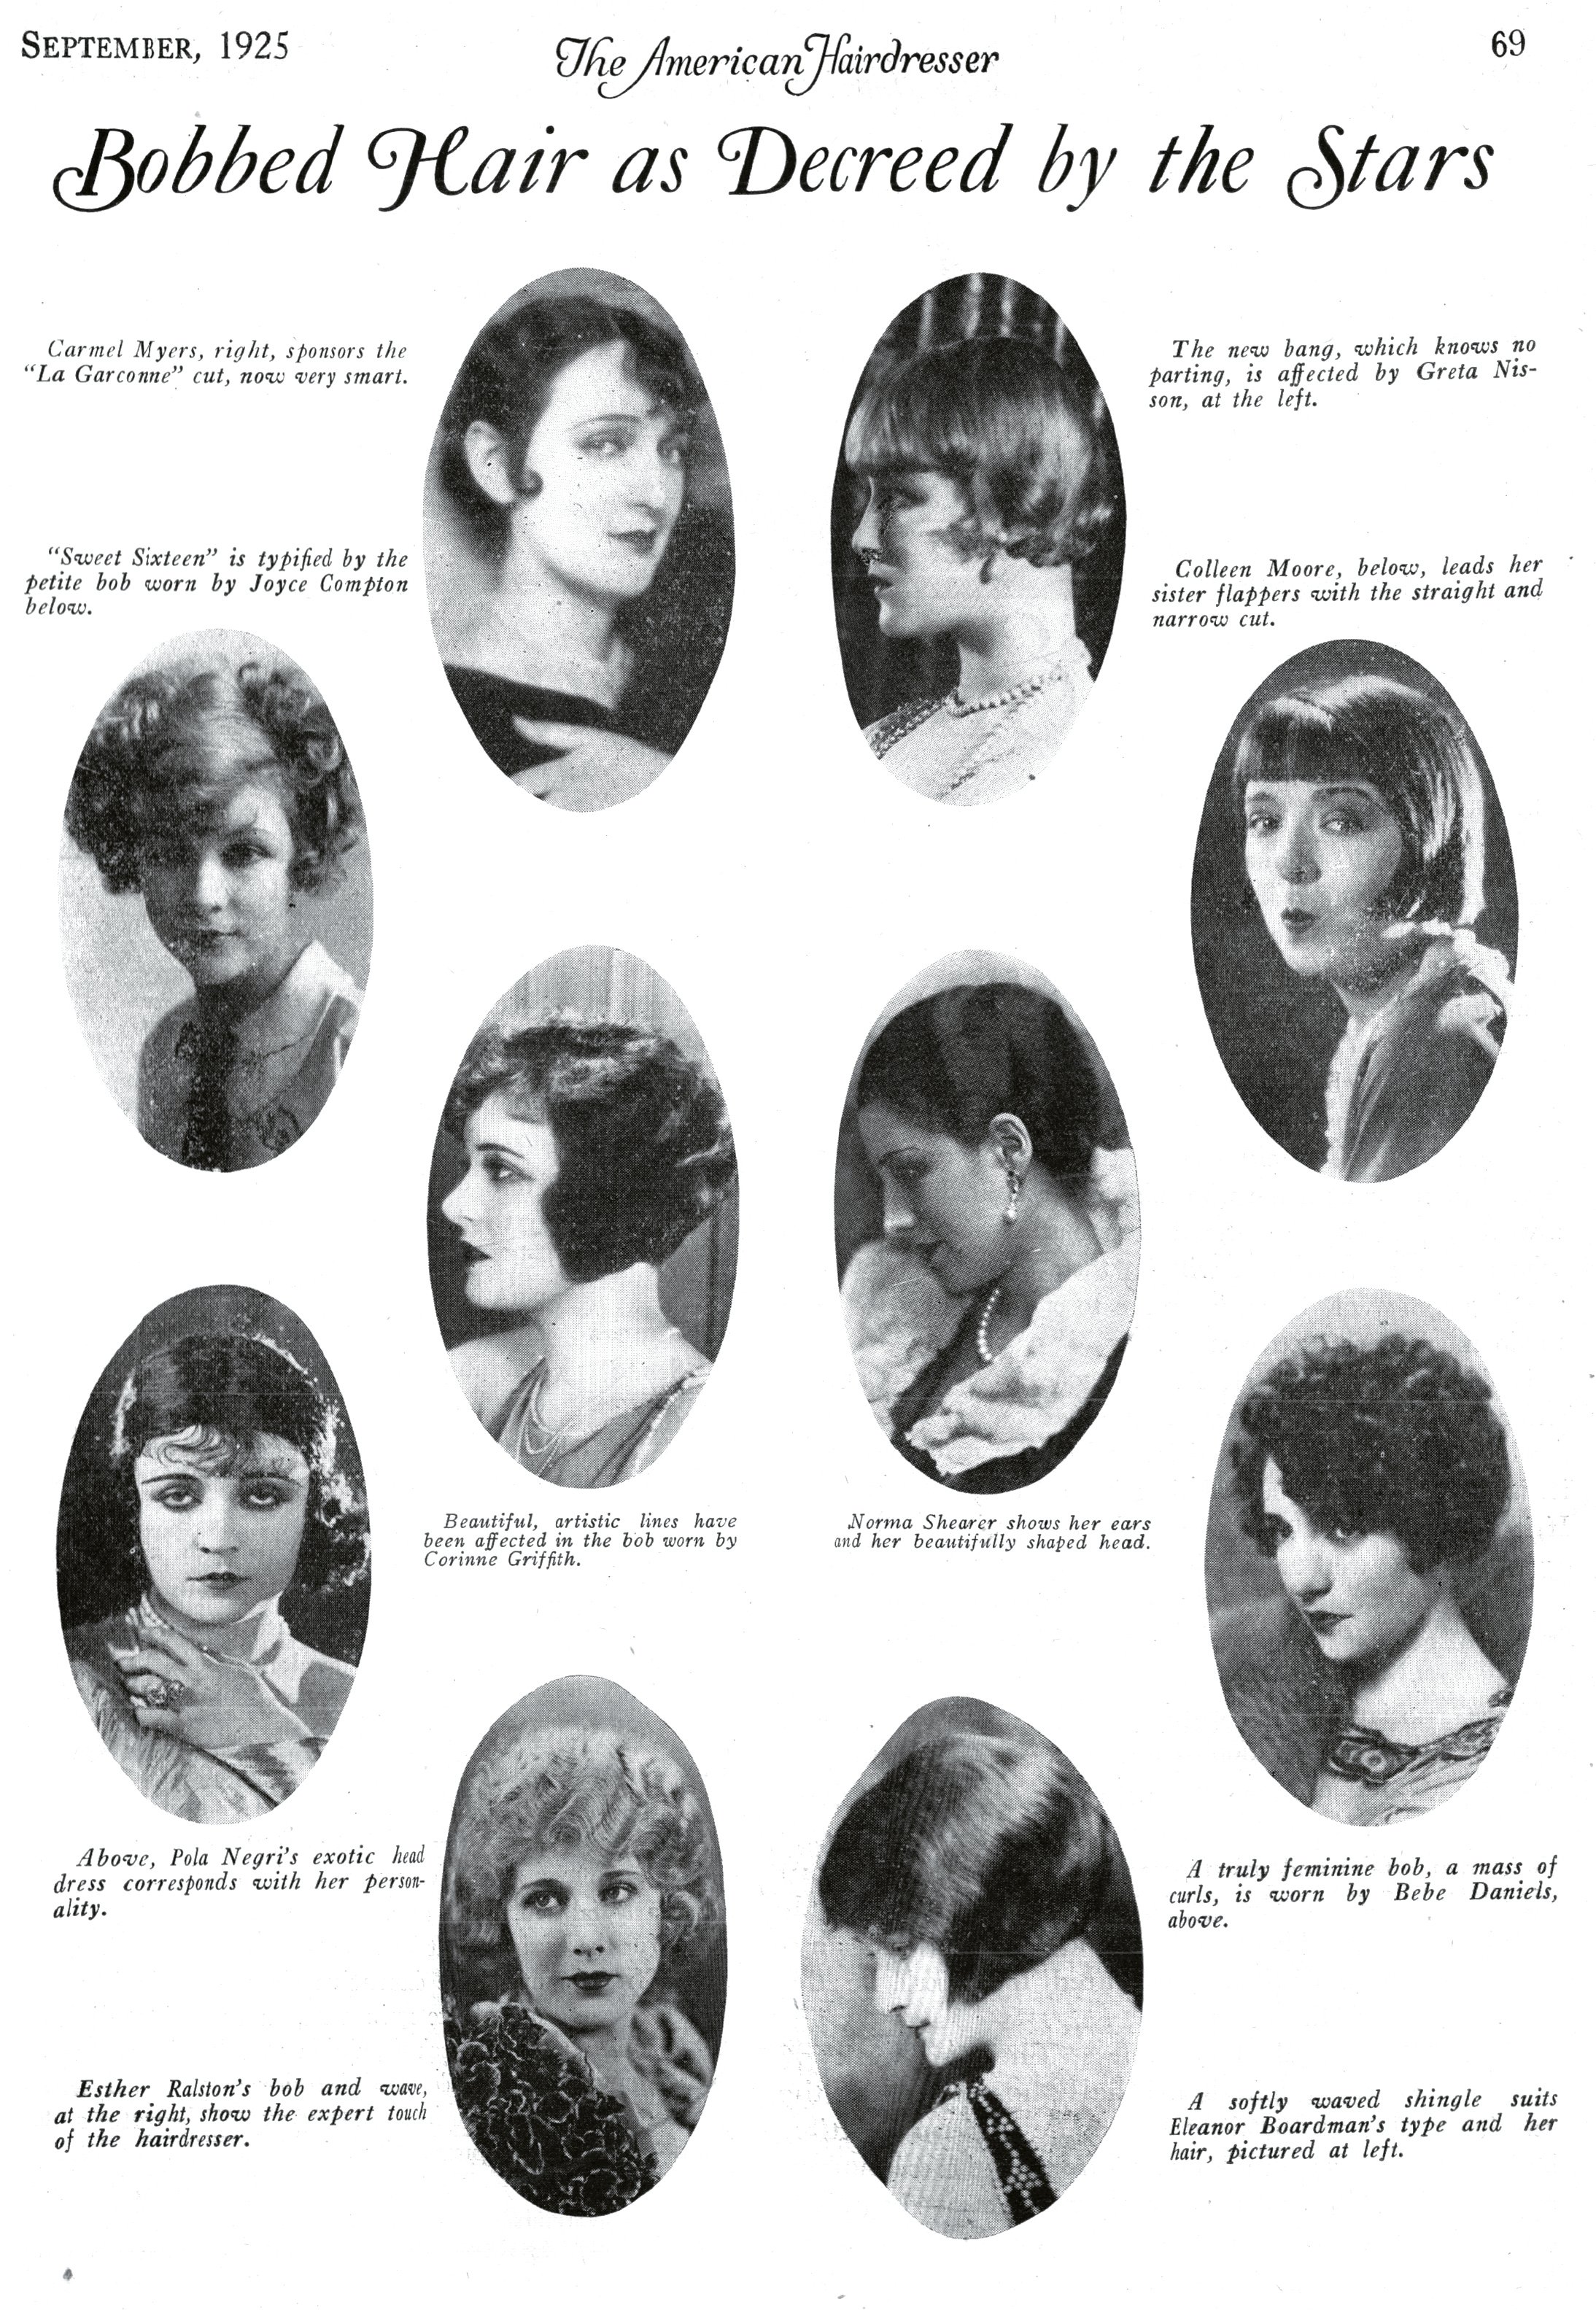 Story of Us, 1920-1930: The Hollywood Factor | American Salon